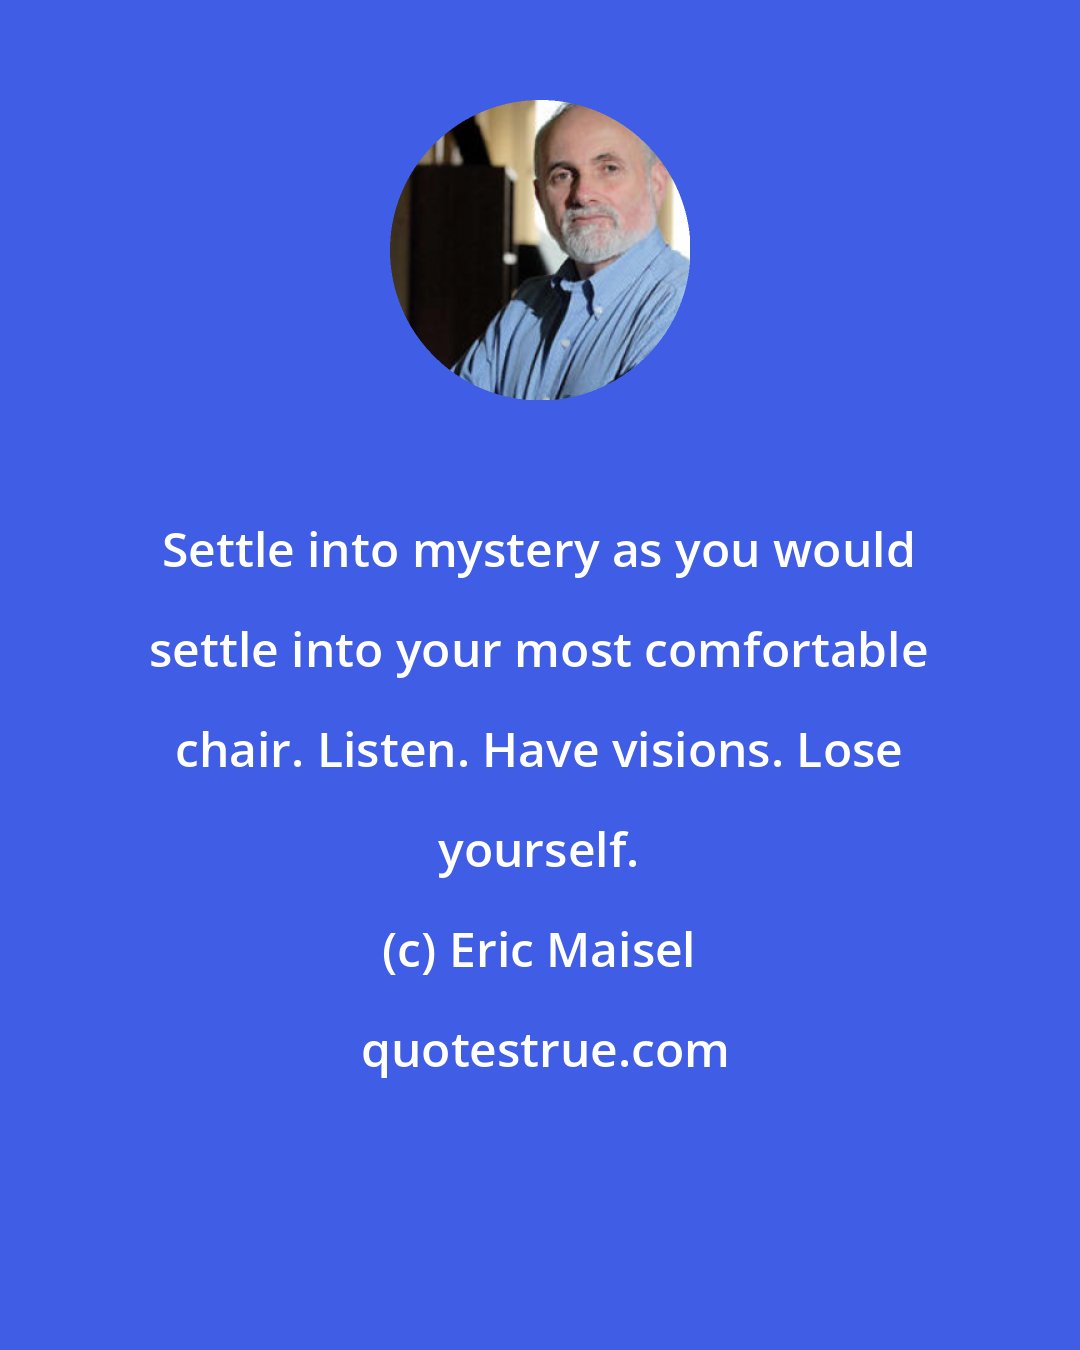 Eric Maisel: Settle into mystery as you would settle into your most comfortable chair. Listen. Have visions. Lose yourself.